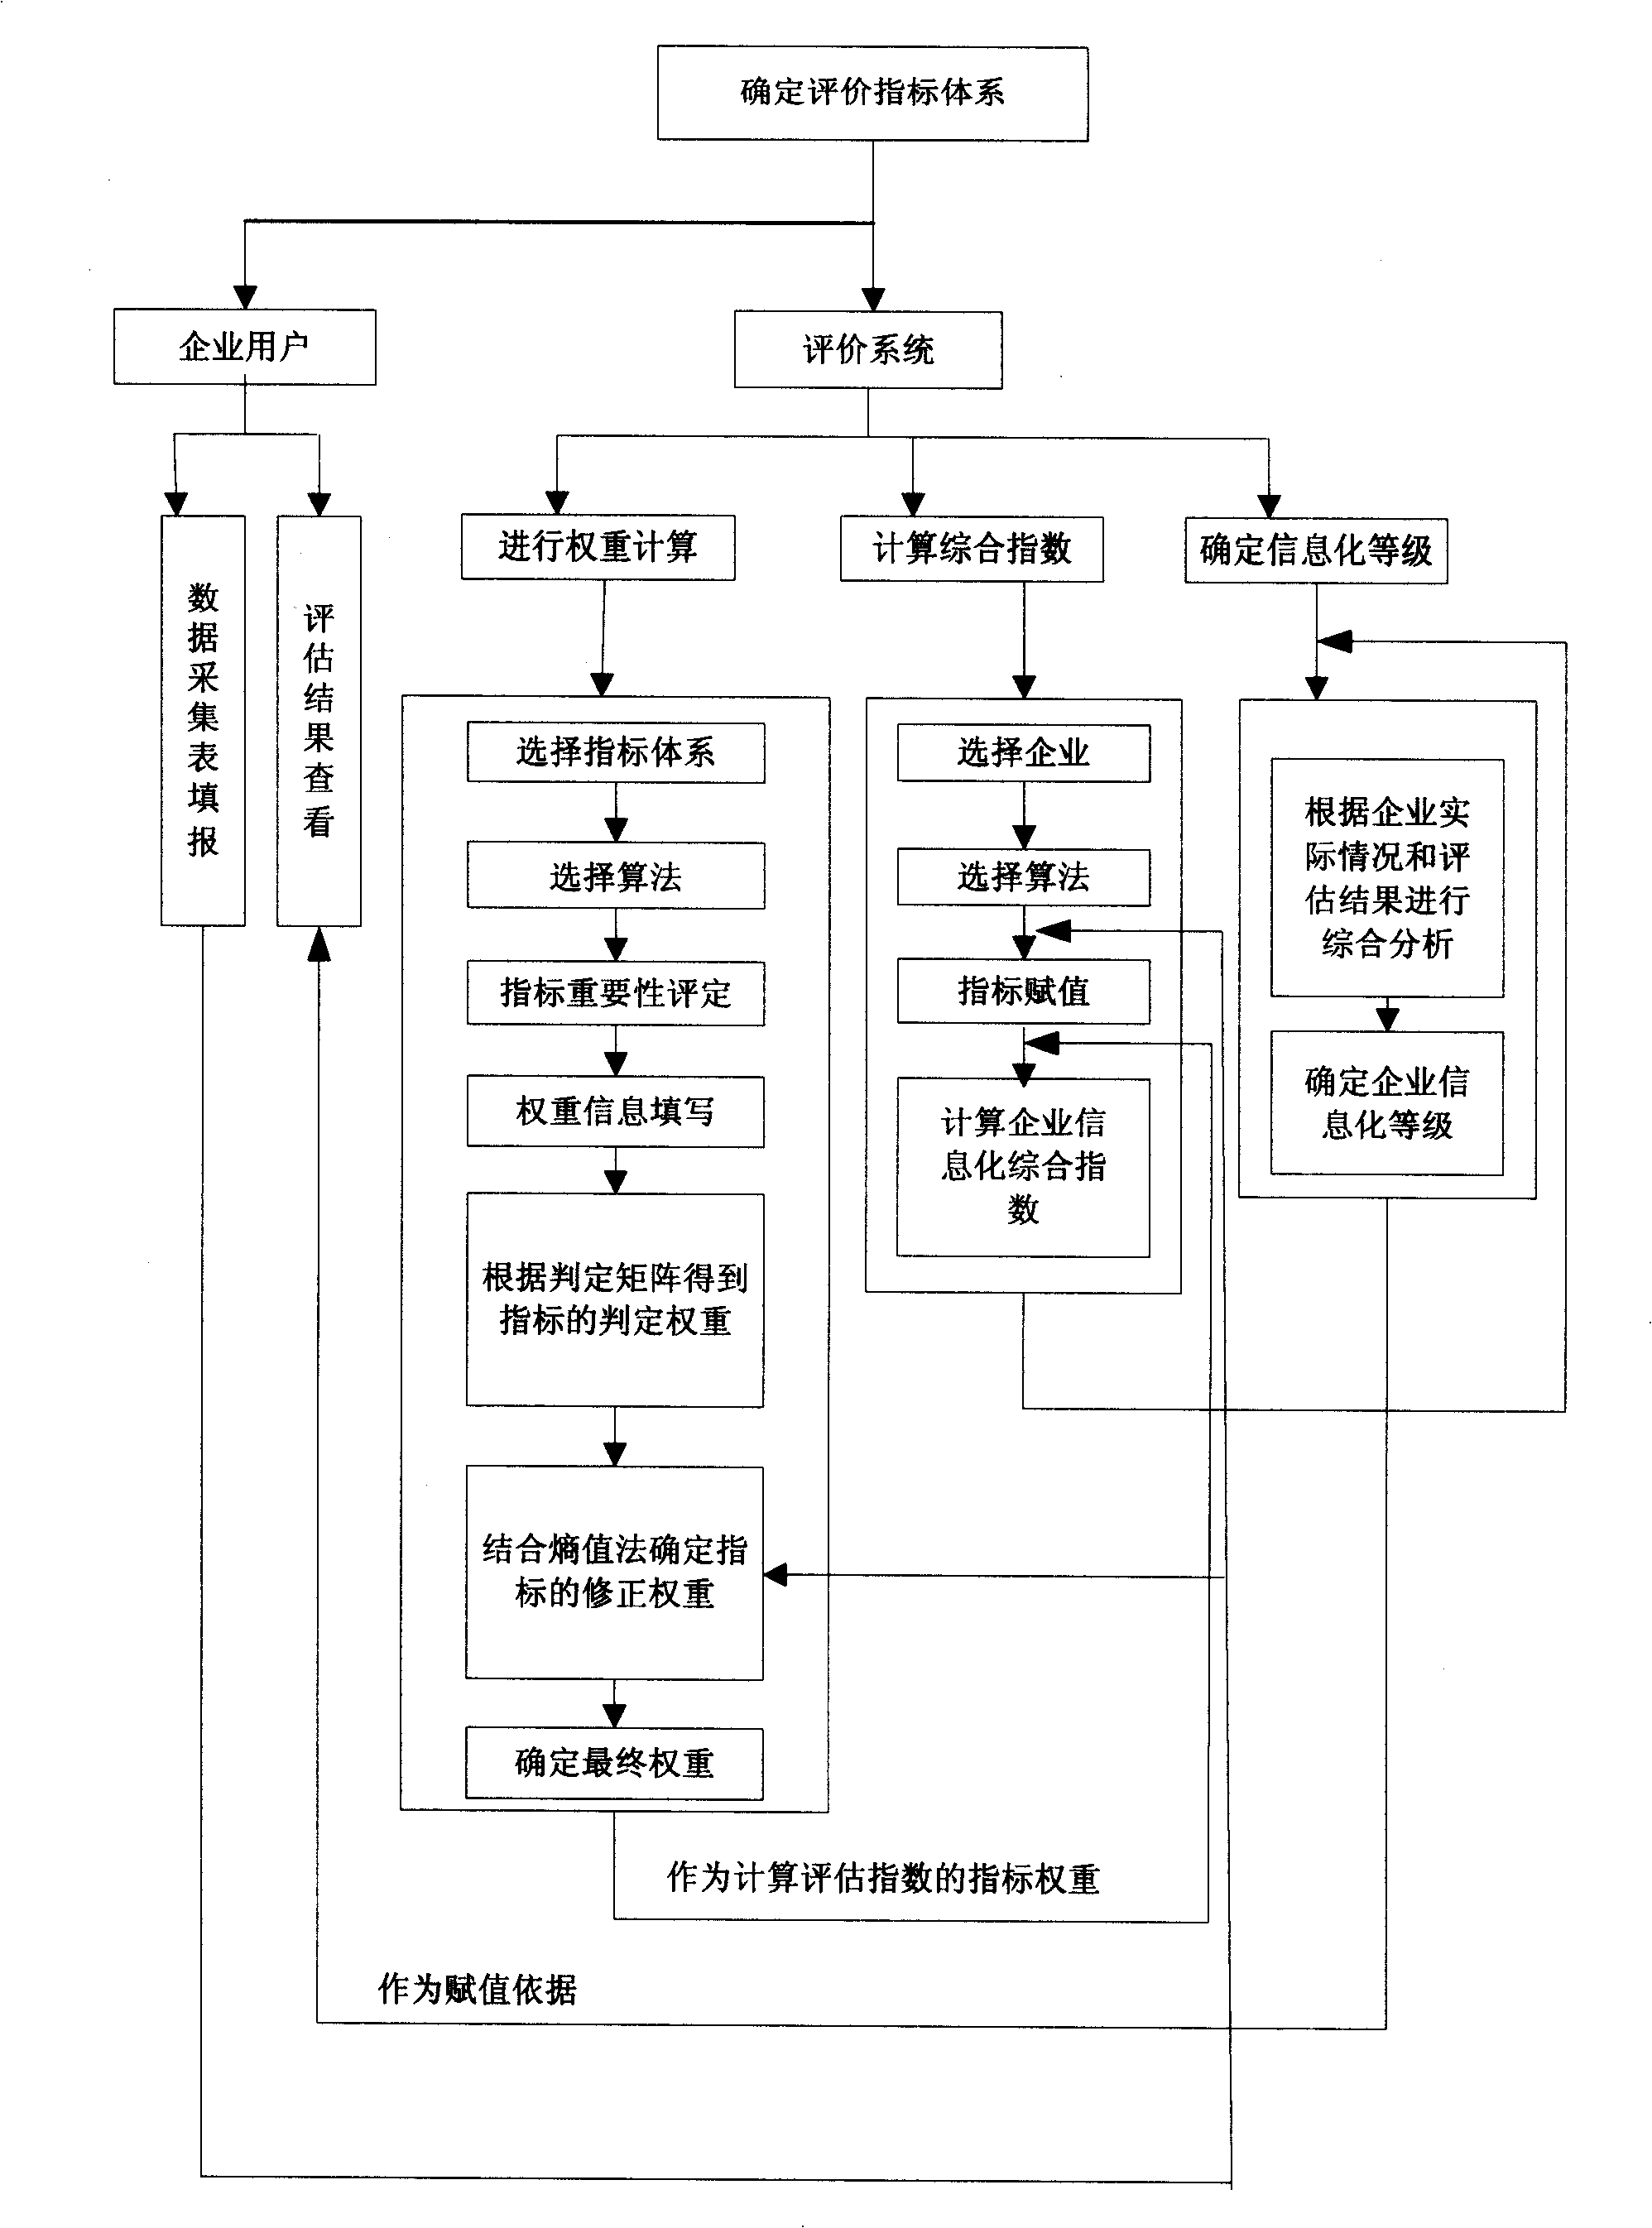 Method and system for evaluating degree of application of enterprise information technology